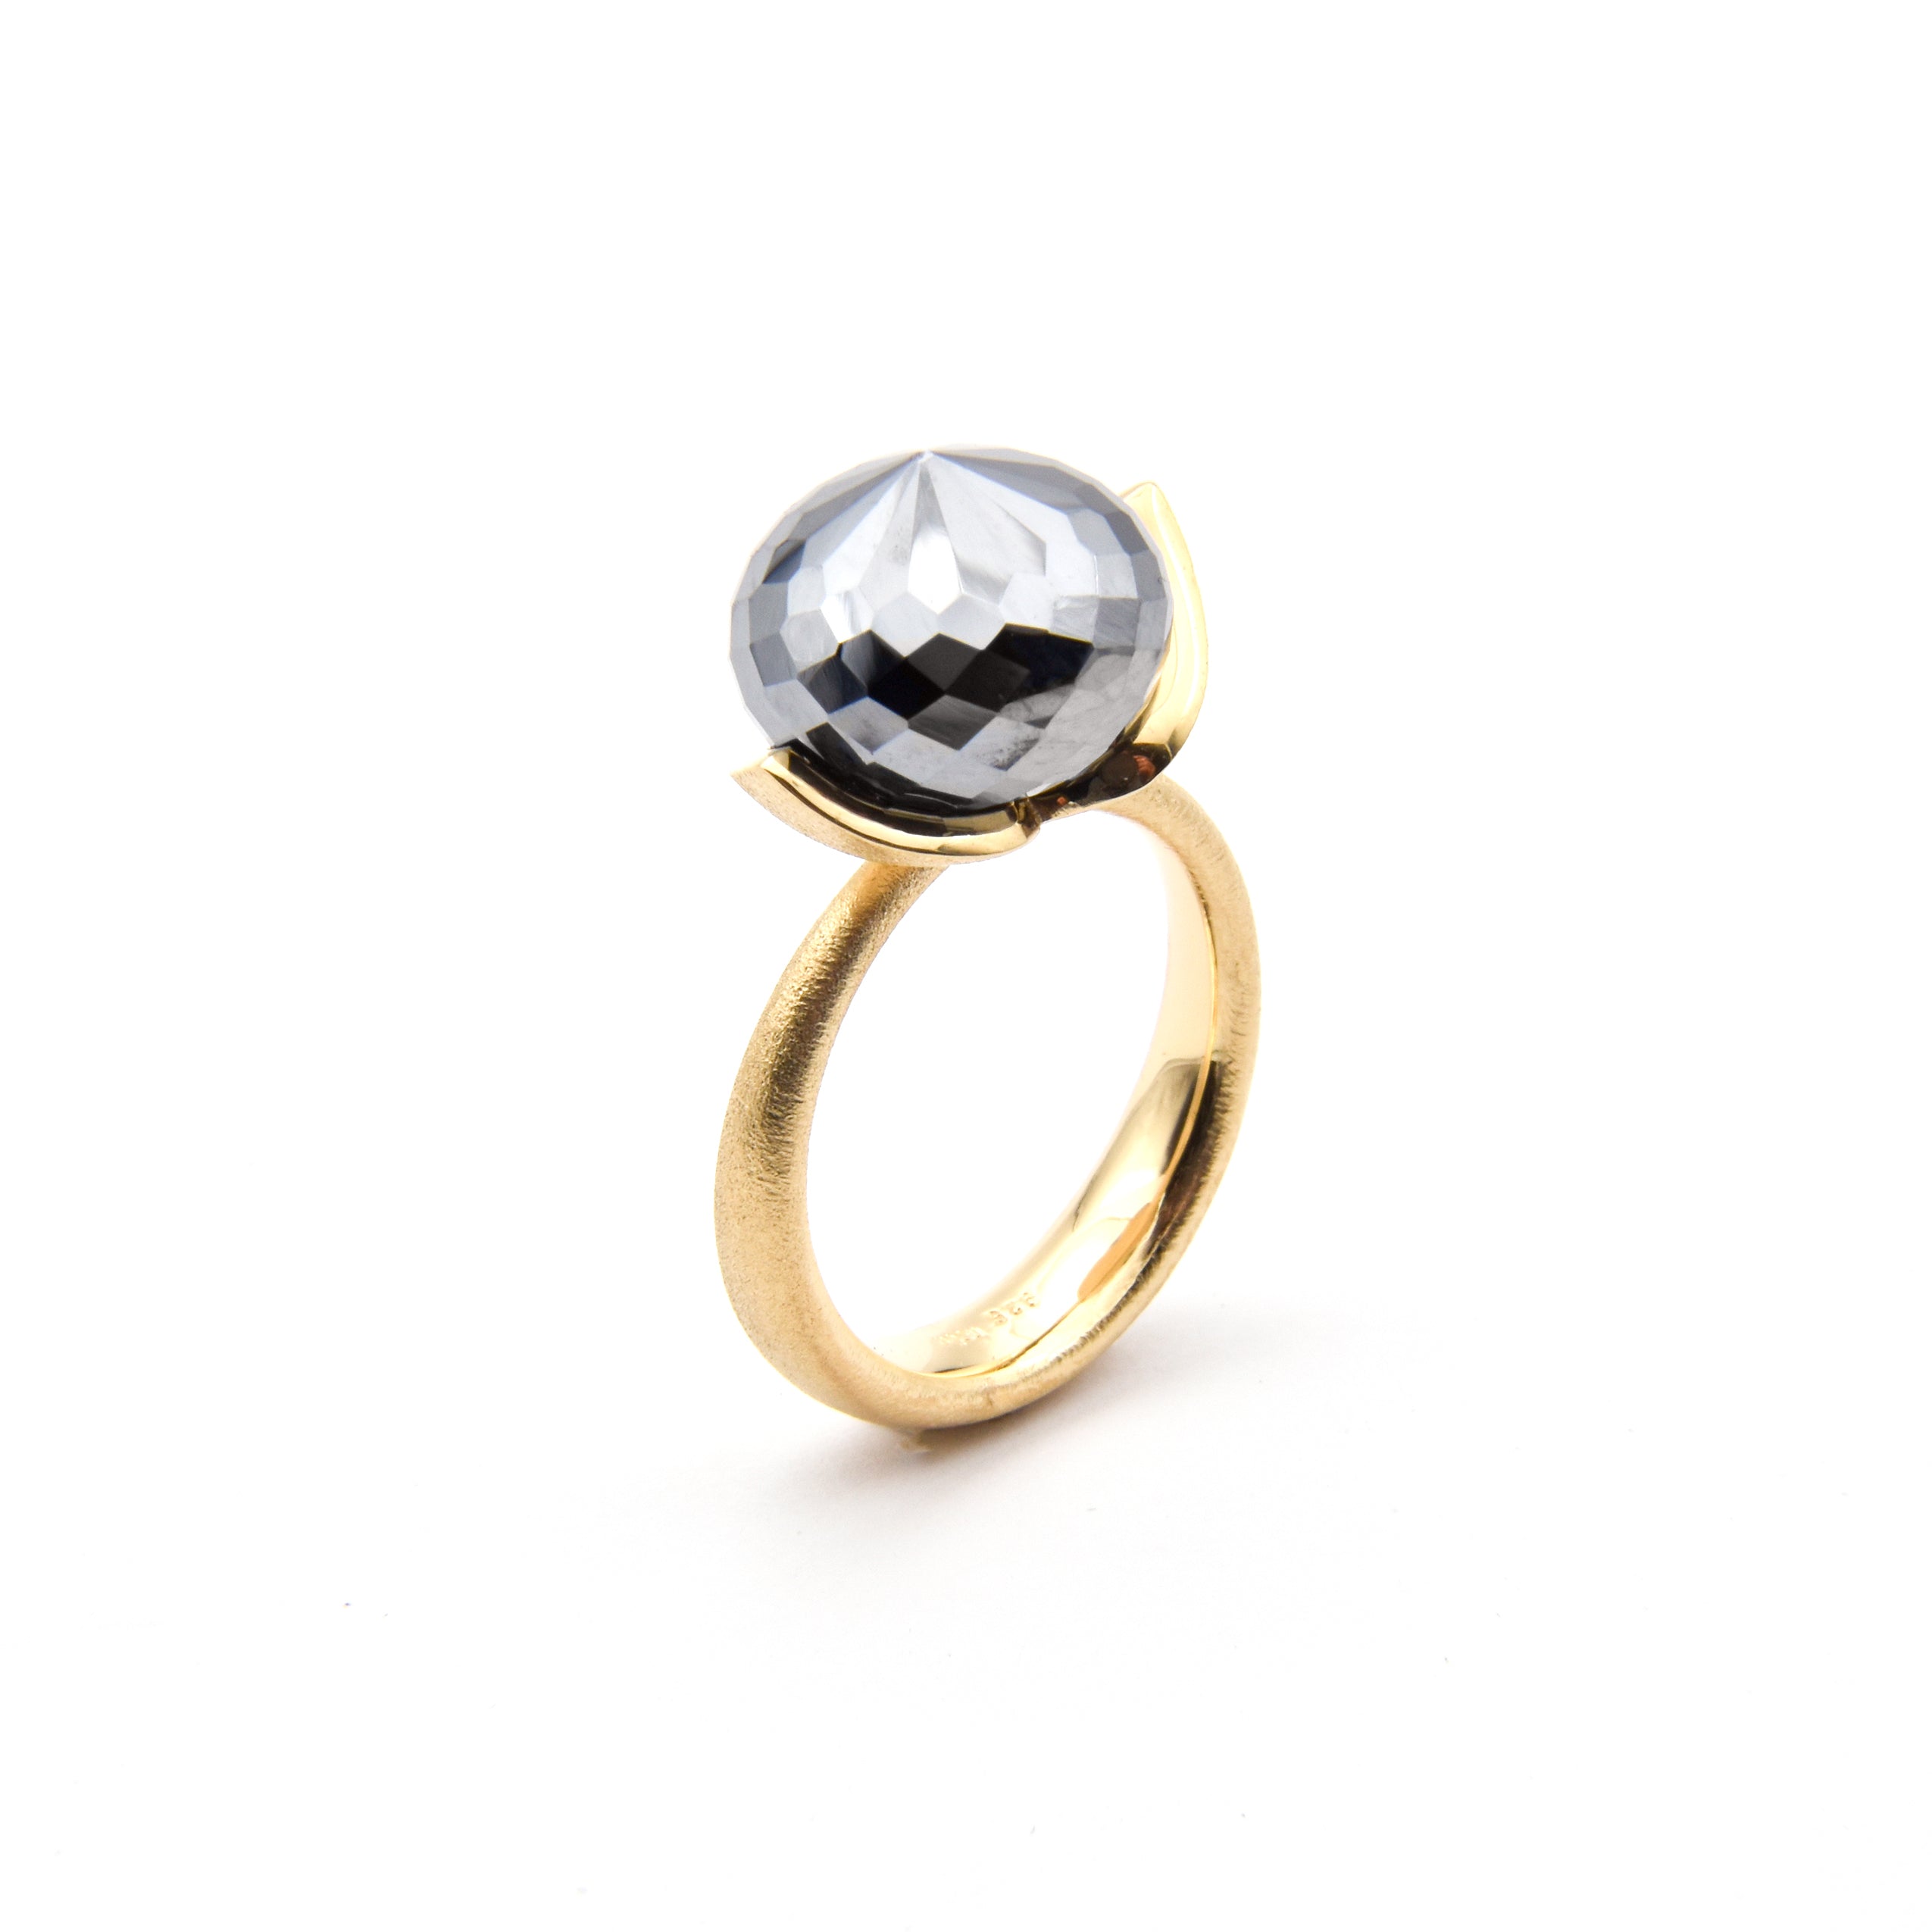 Dolce ring "big" with hematite rec. 925/-